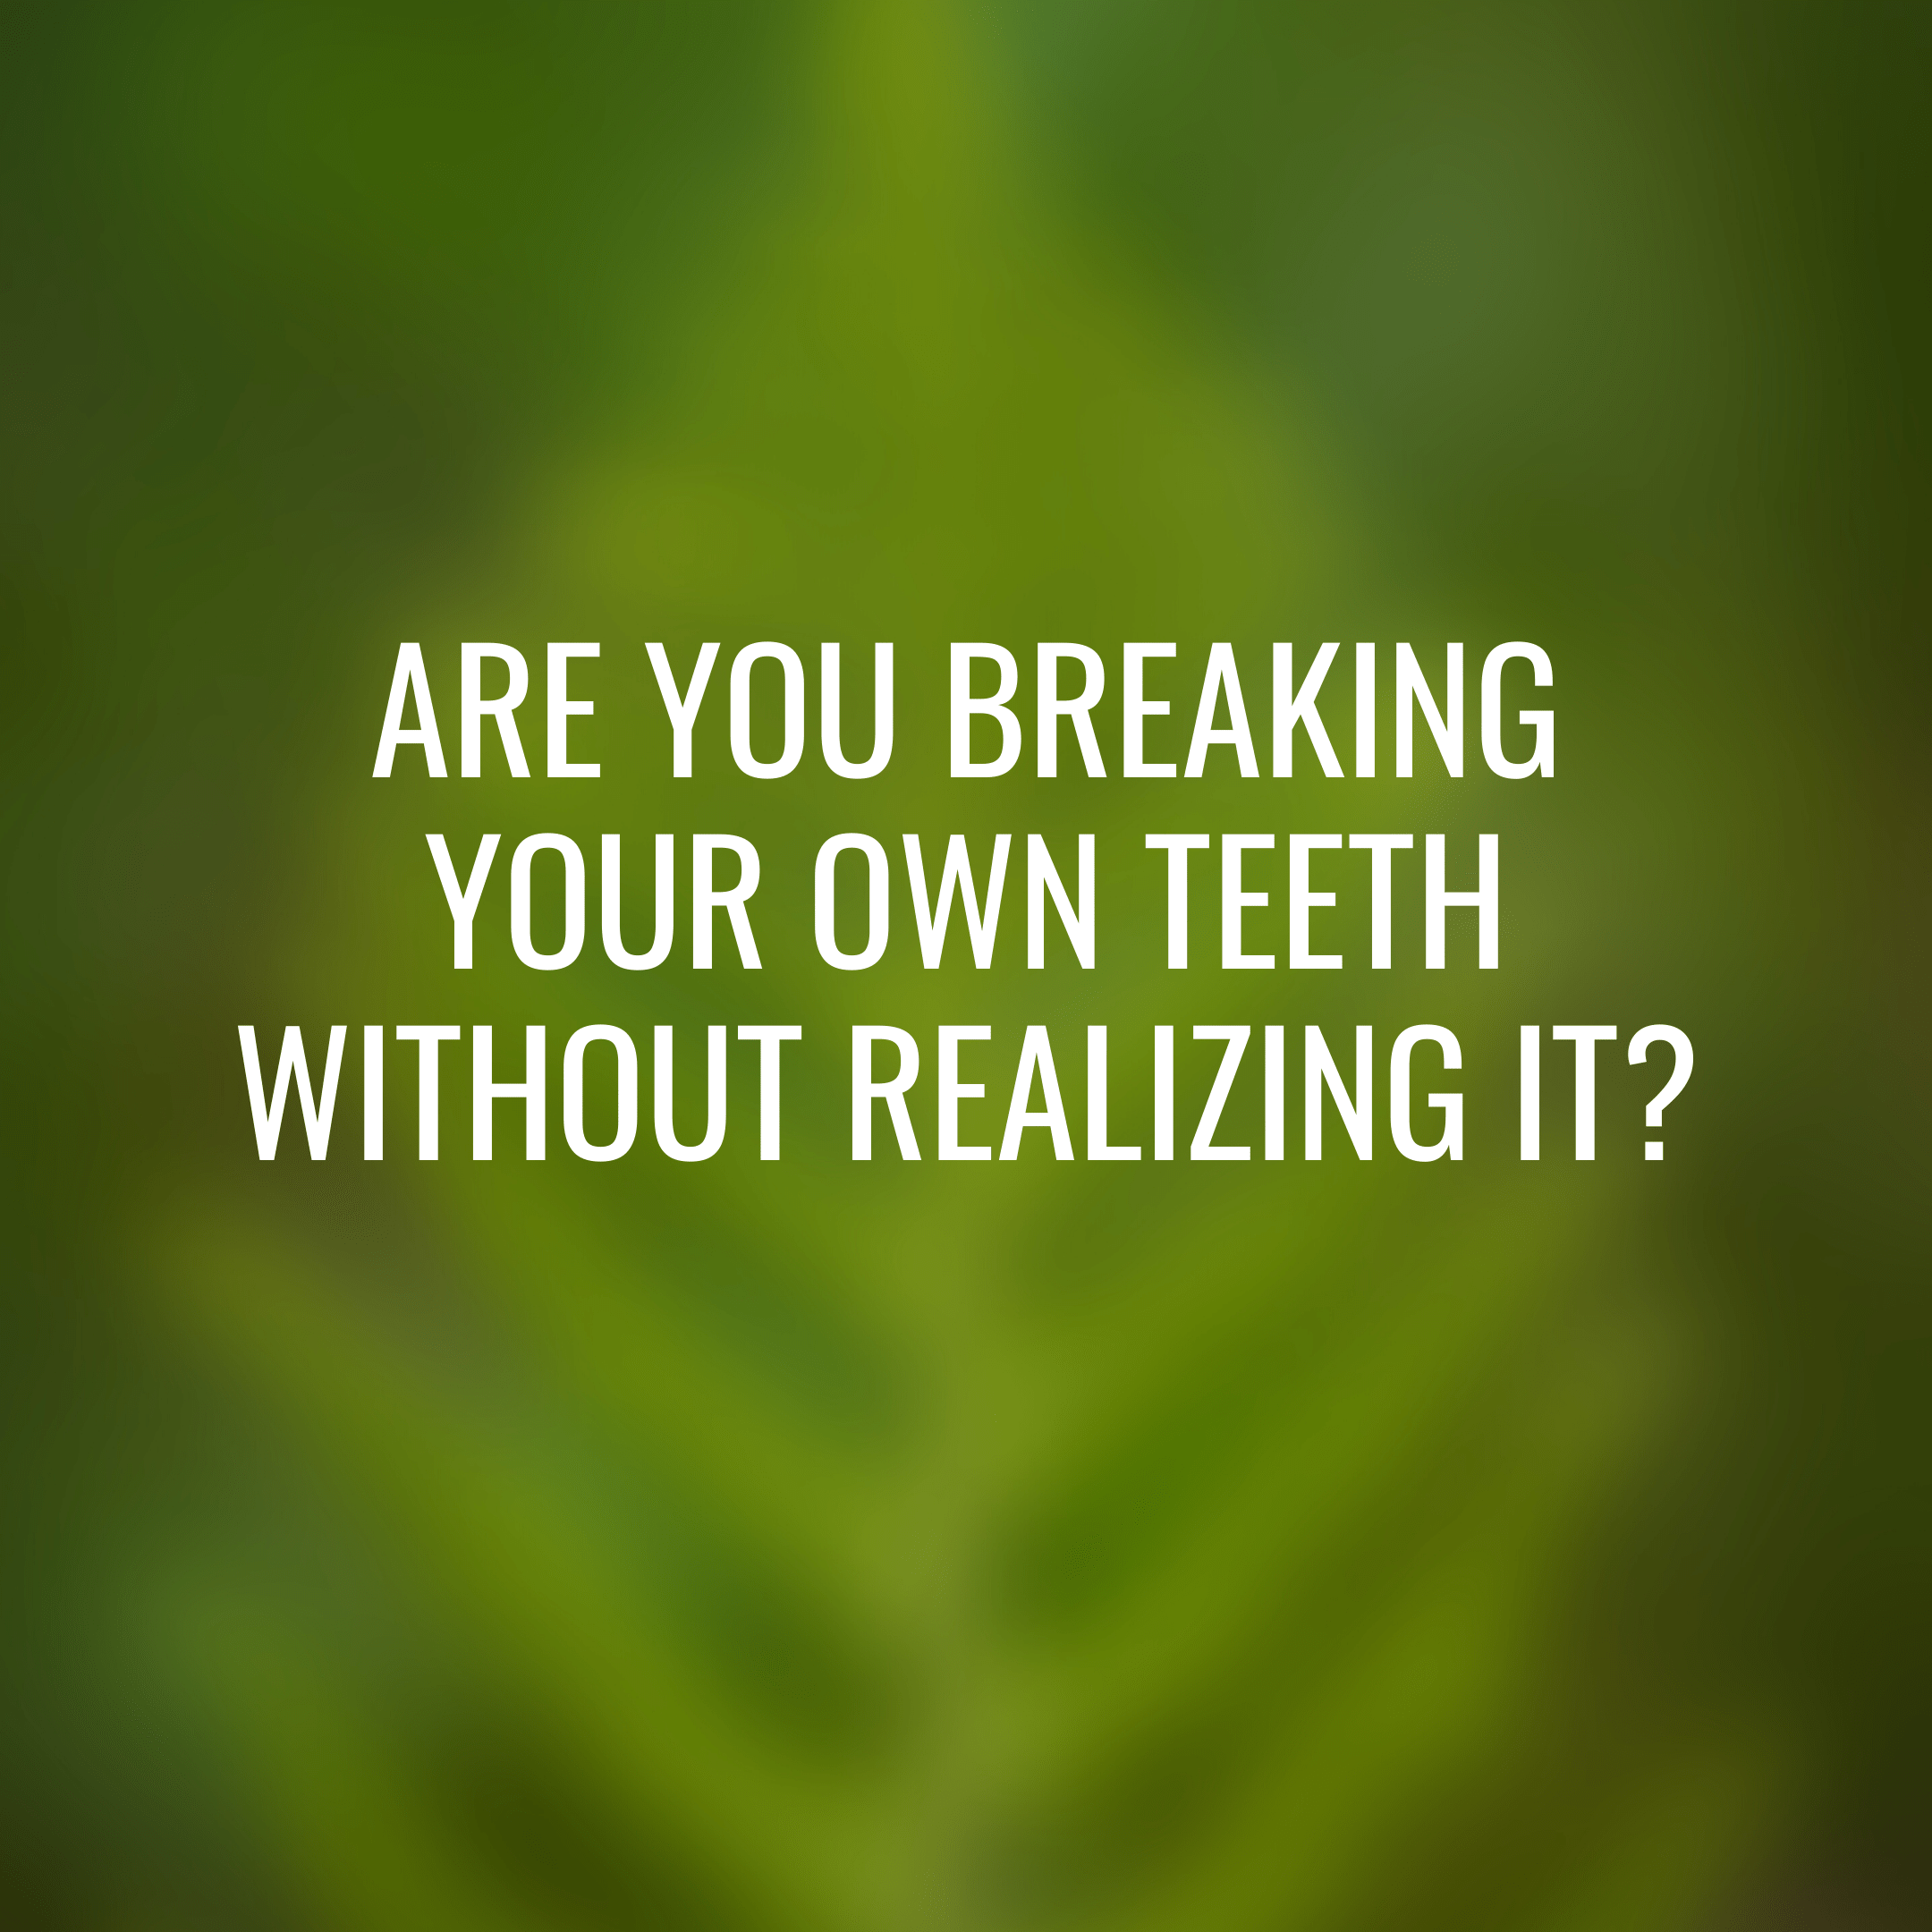 Dr. G’s High Level Dentistry Series:  Are you breaking your own teeth without realizing it?